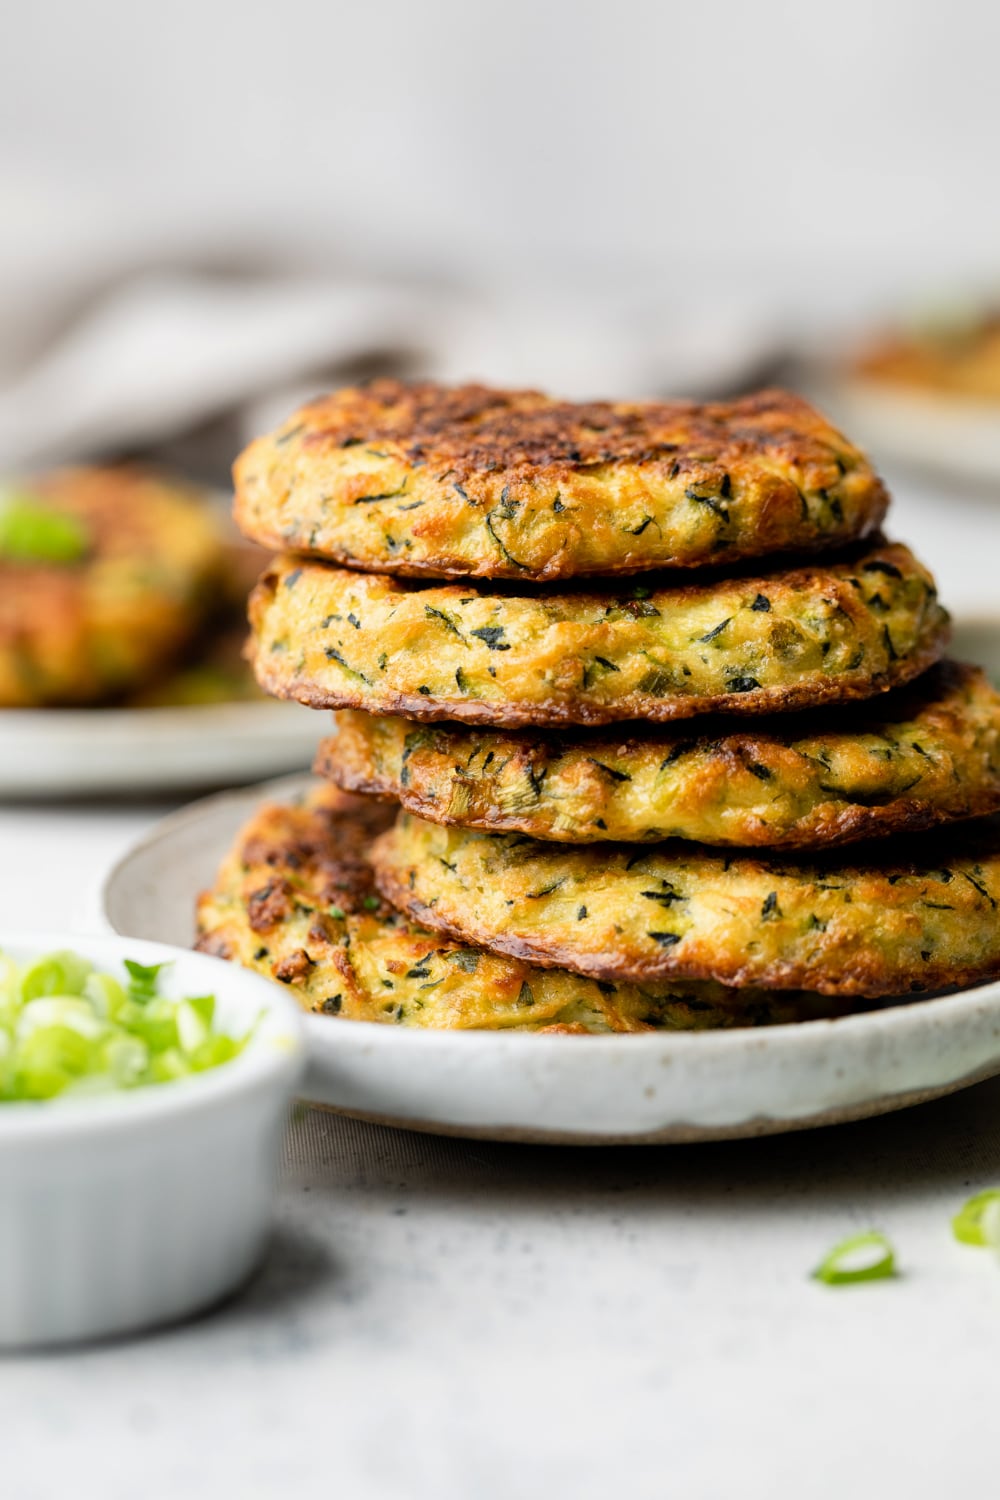 A large stack of fritters on a plate.